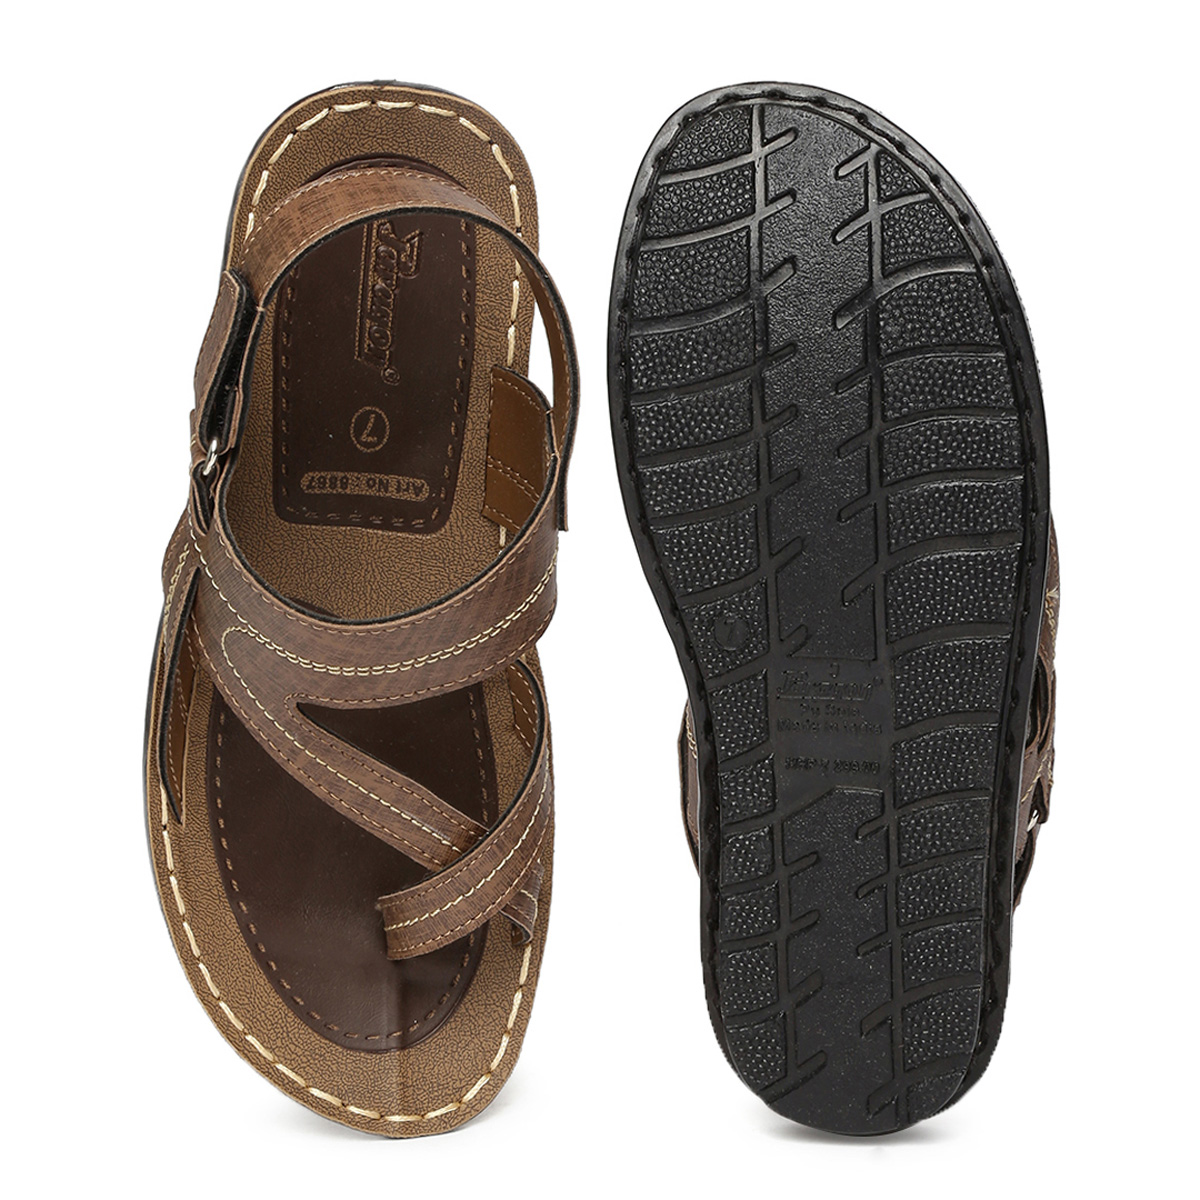 Buy Paragon-Slickers Men's Brown Slippers Online @ ₹224 from ShopClues